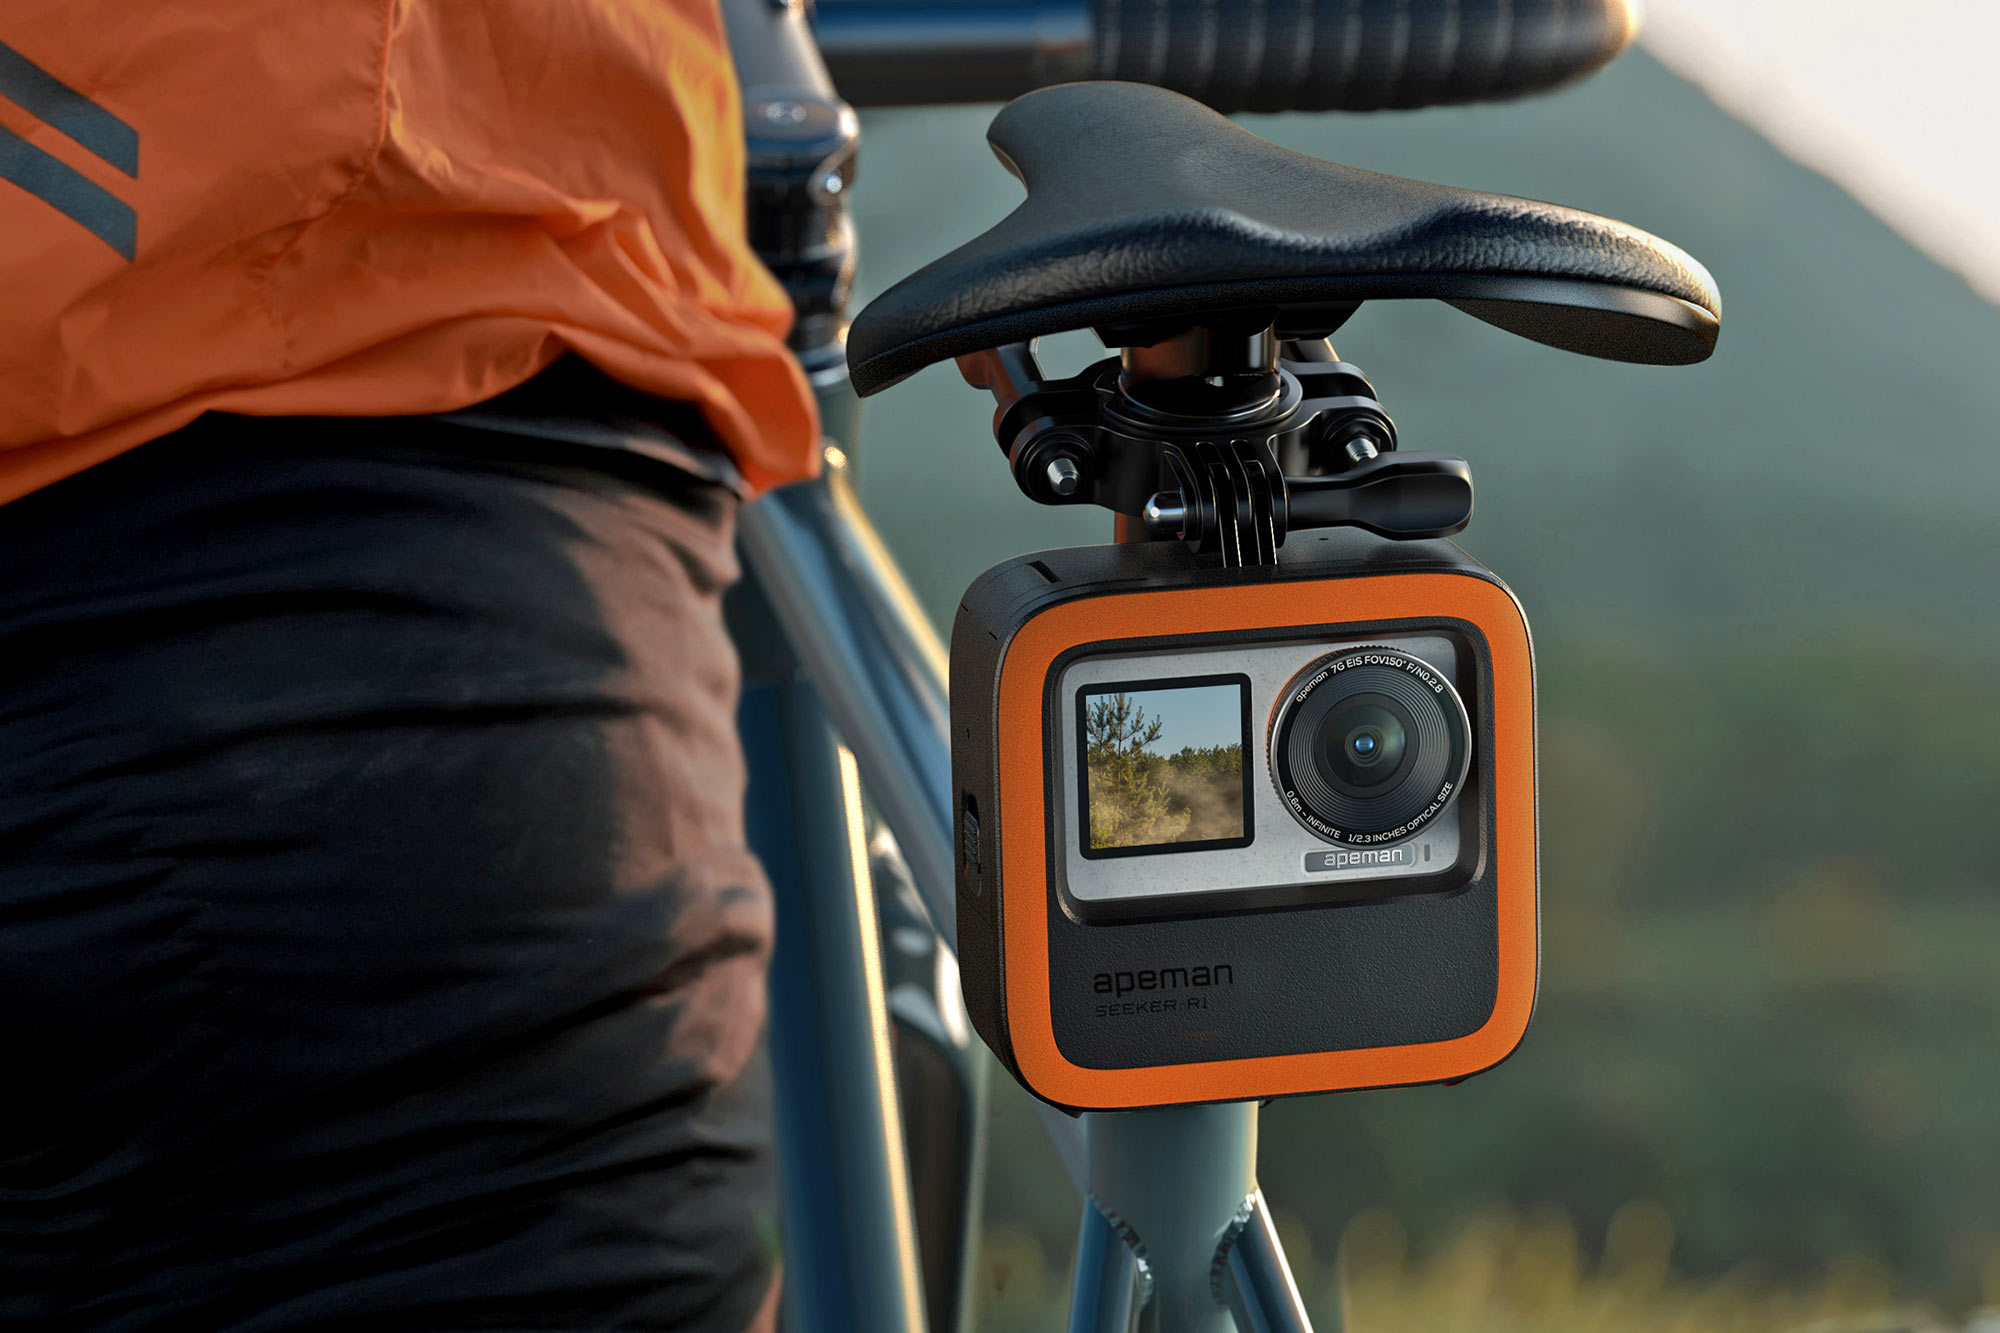 Apeman Seeker R1 all-in-one cycling safety action camera light, on-bike